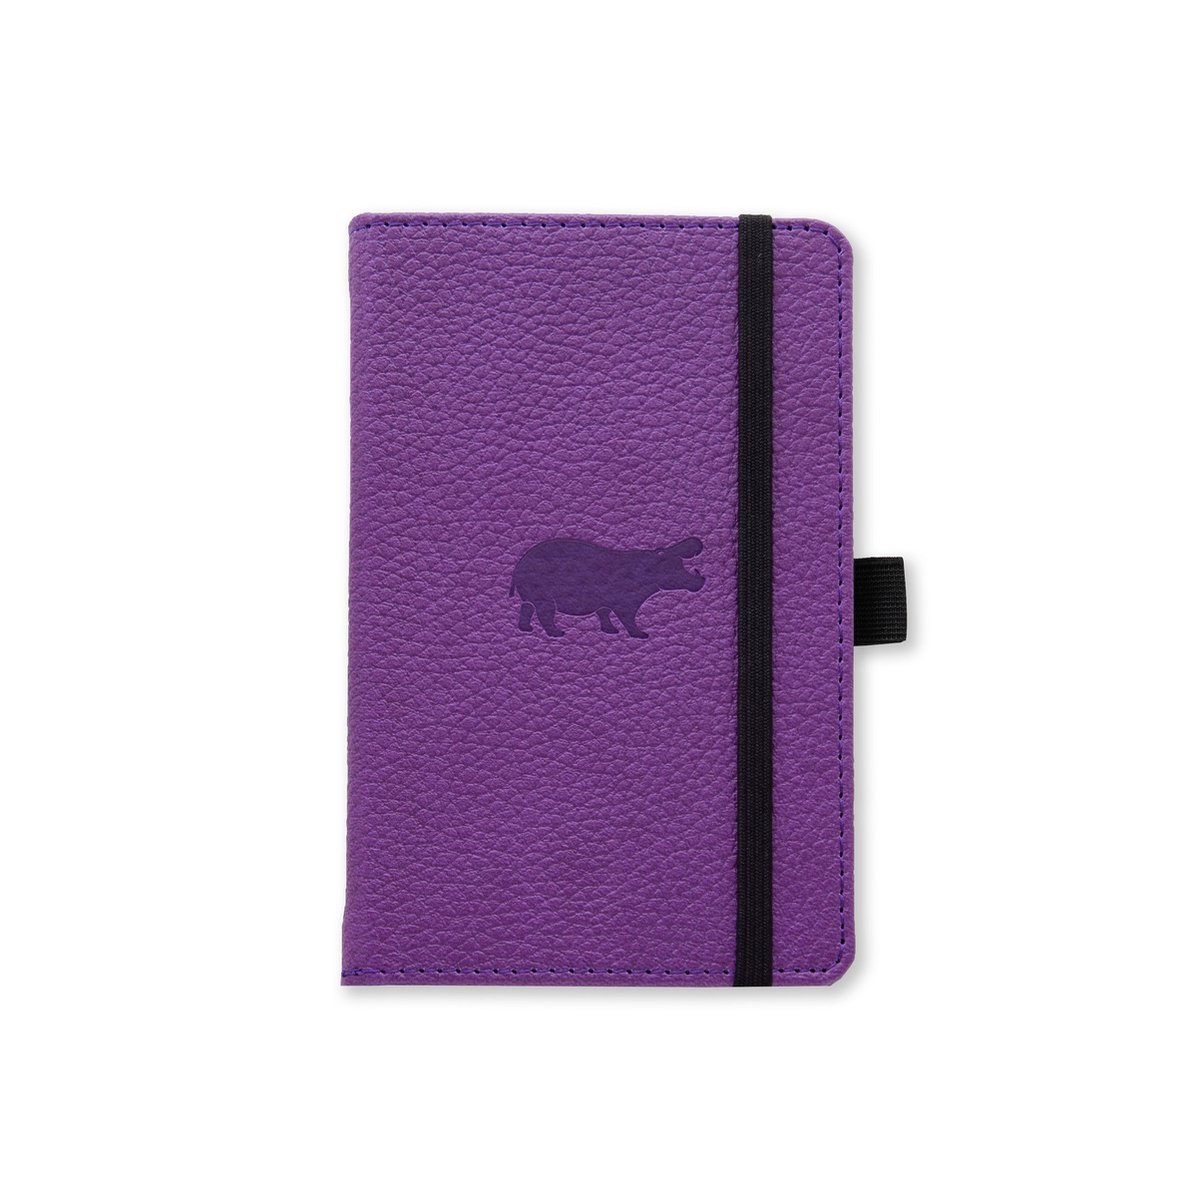 Dingbats A6+ Wildlife Purple Hippo Notebook – Dotted